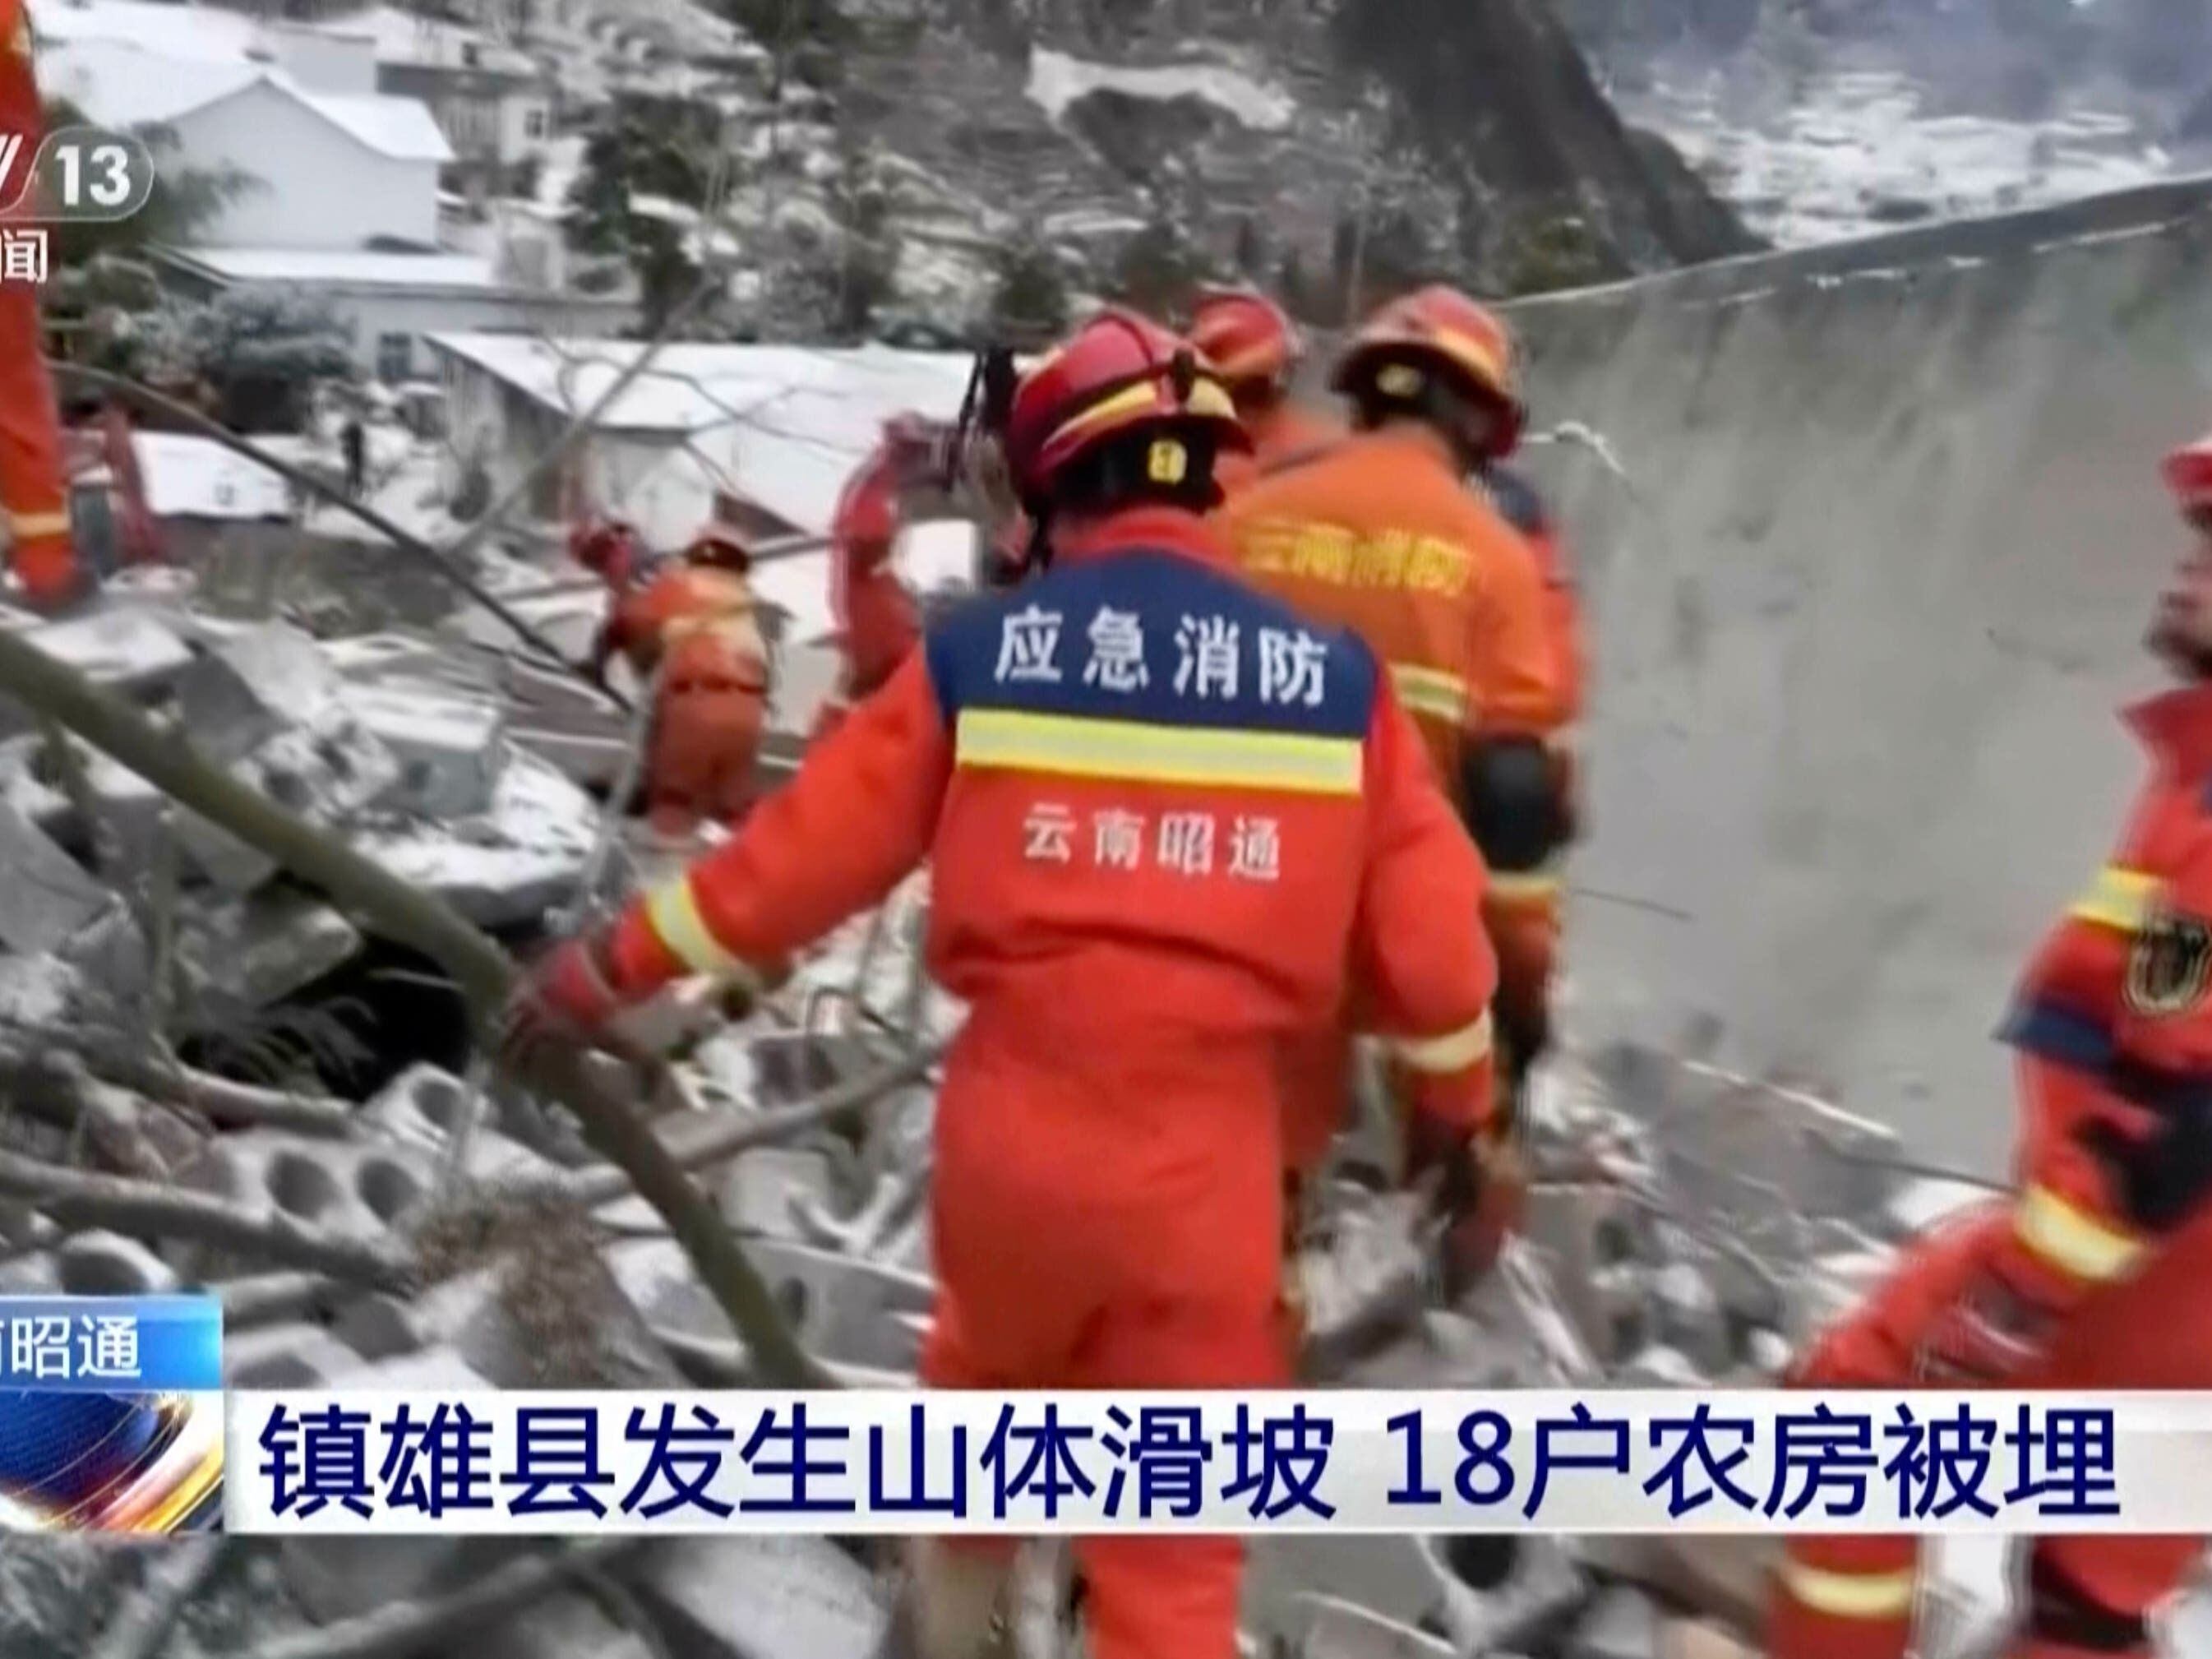 Landslide in mountainous south-western China buries 47 people